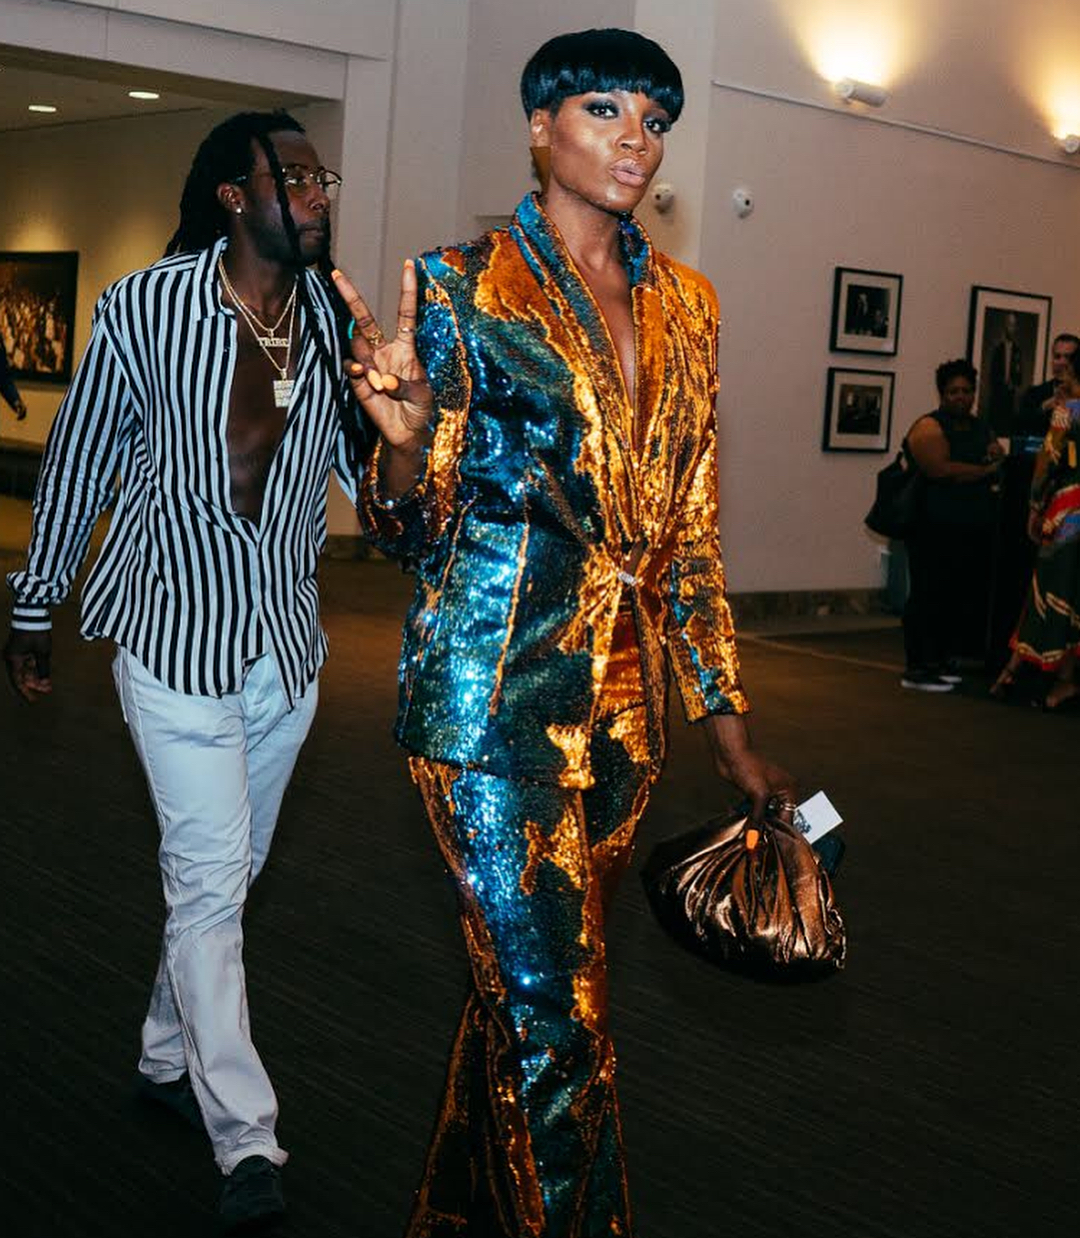 Seyi Shay Wore the Sparkliest Sequin Suit to the 2018 BMI Awards and She Looked AMAZING!